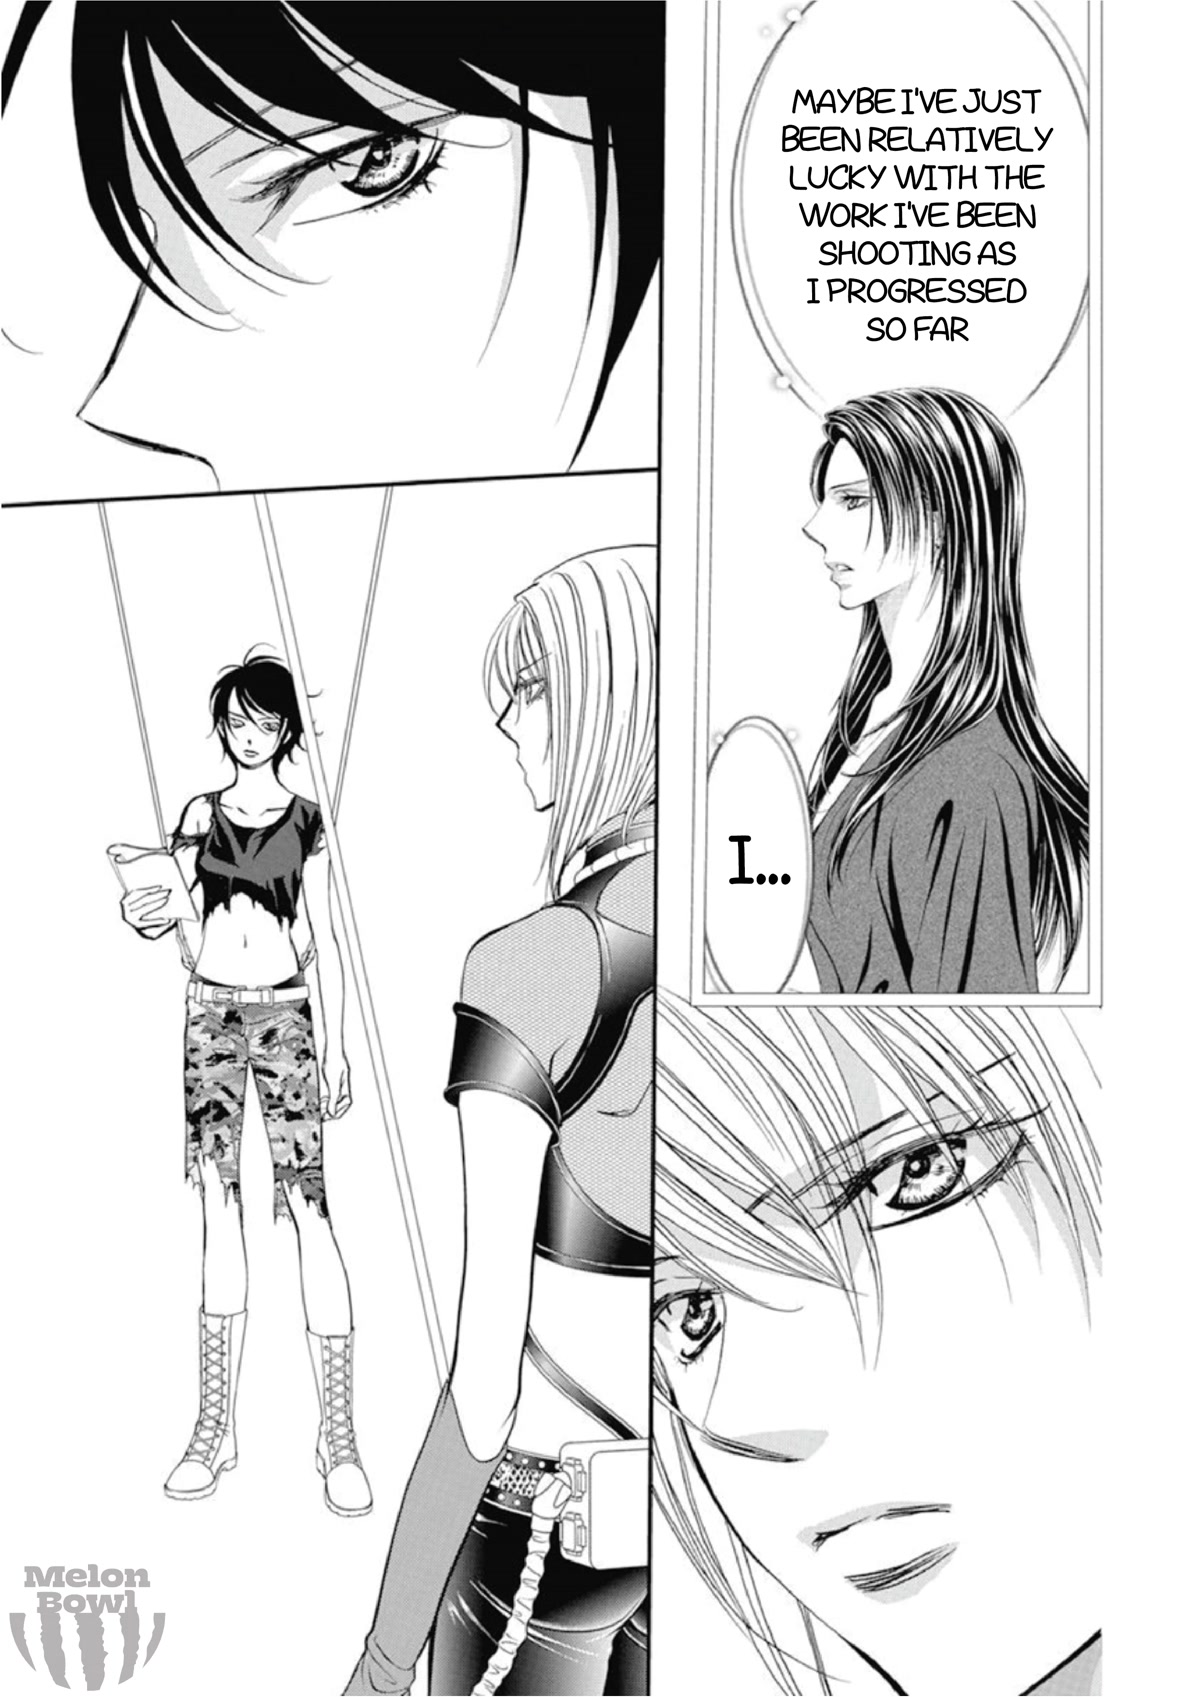 Skip Beat!, Chapter 308 Fairytale Dialogue image 16